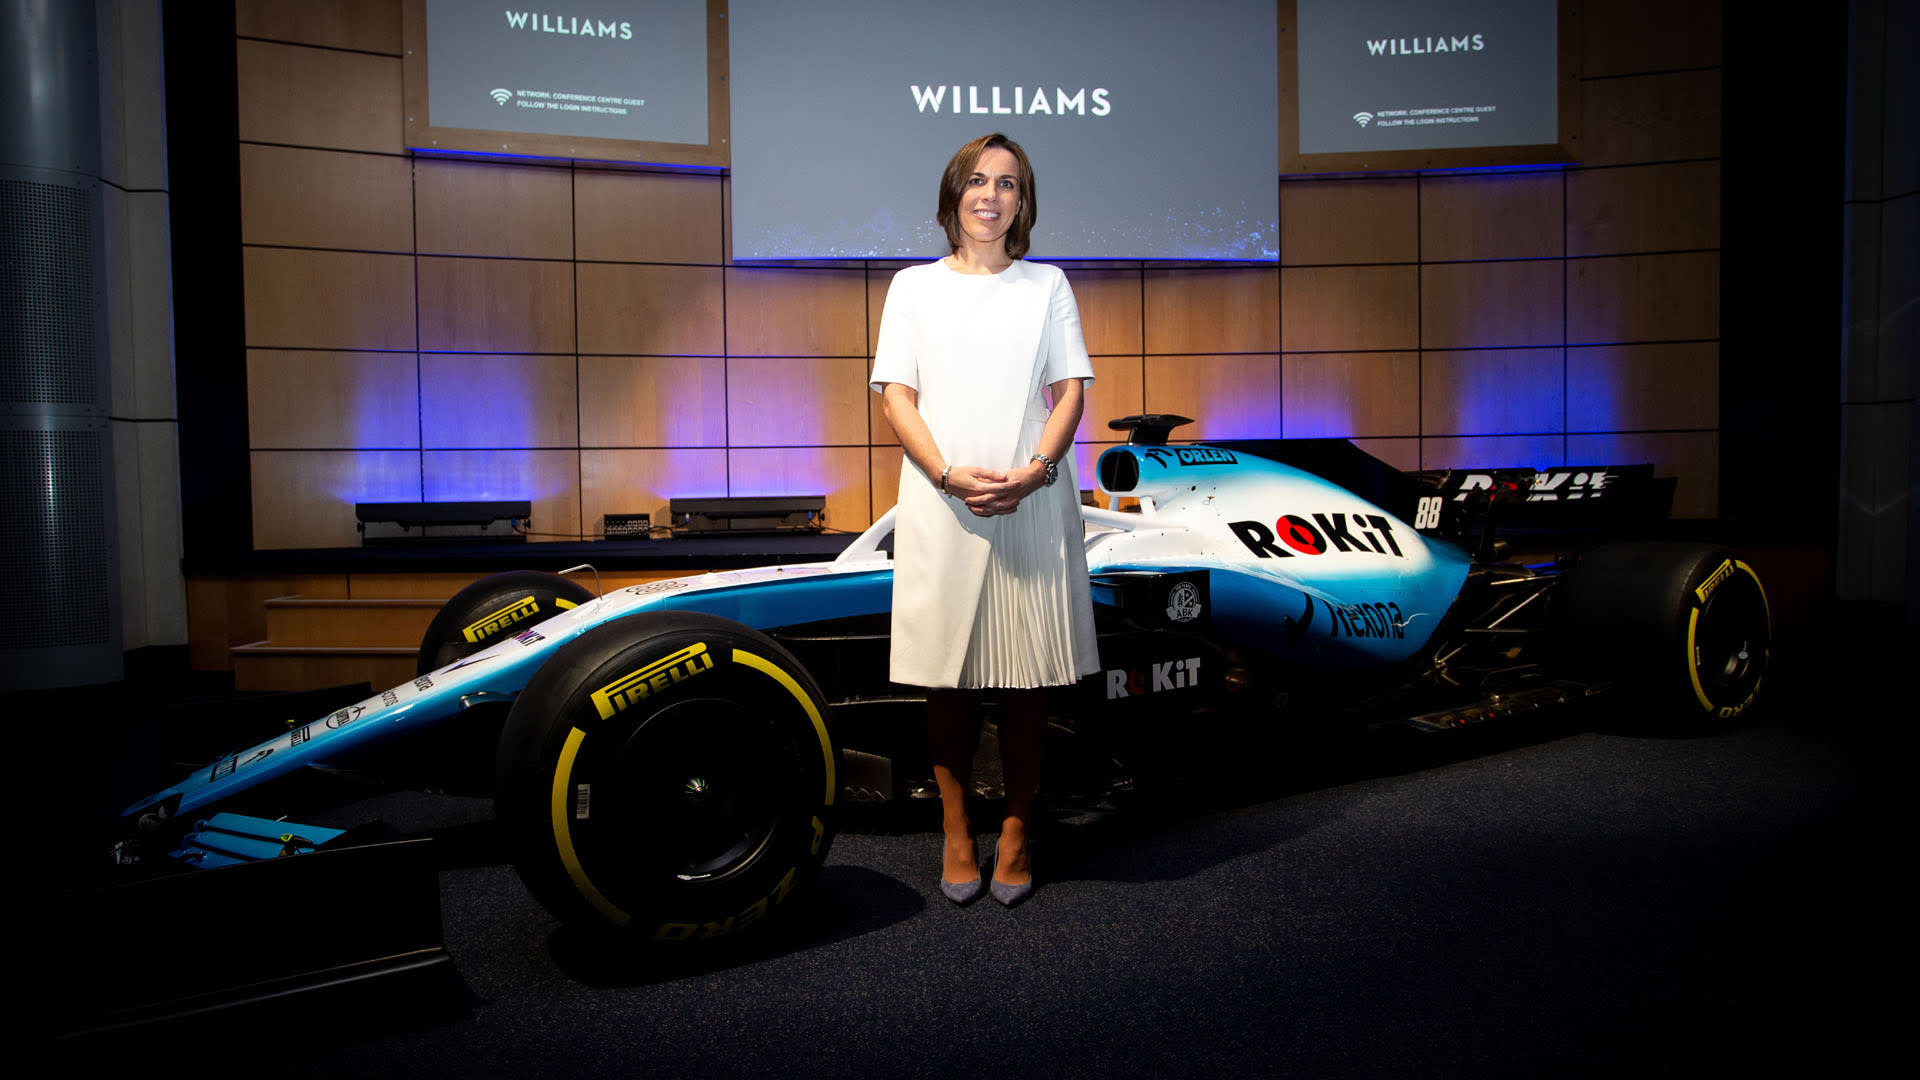 How a 45-minute talk and a bottle of sauce helped Williams secure a new title sponsor ...